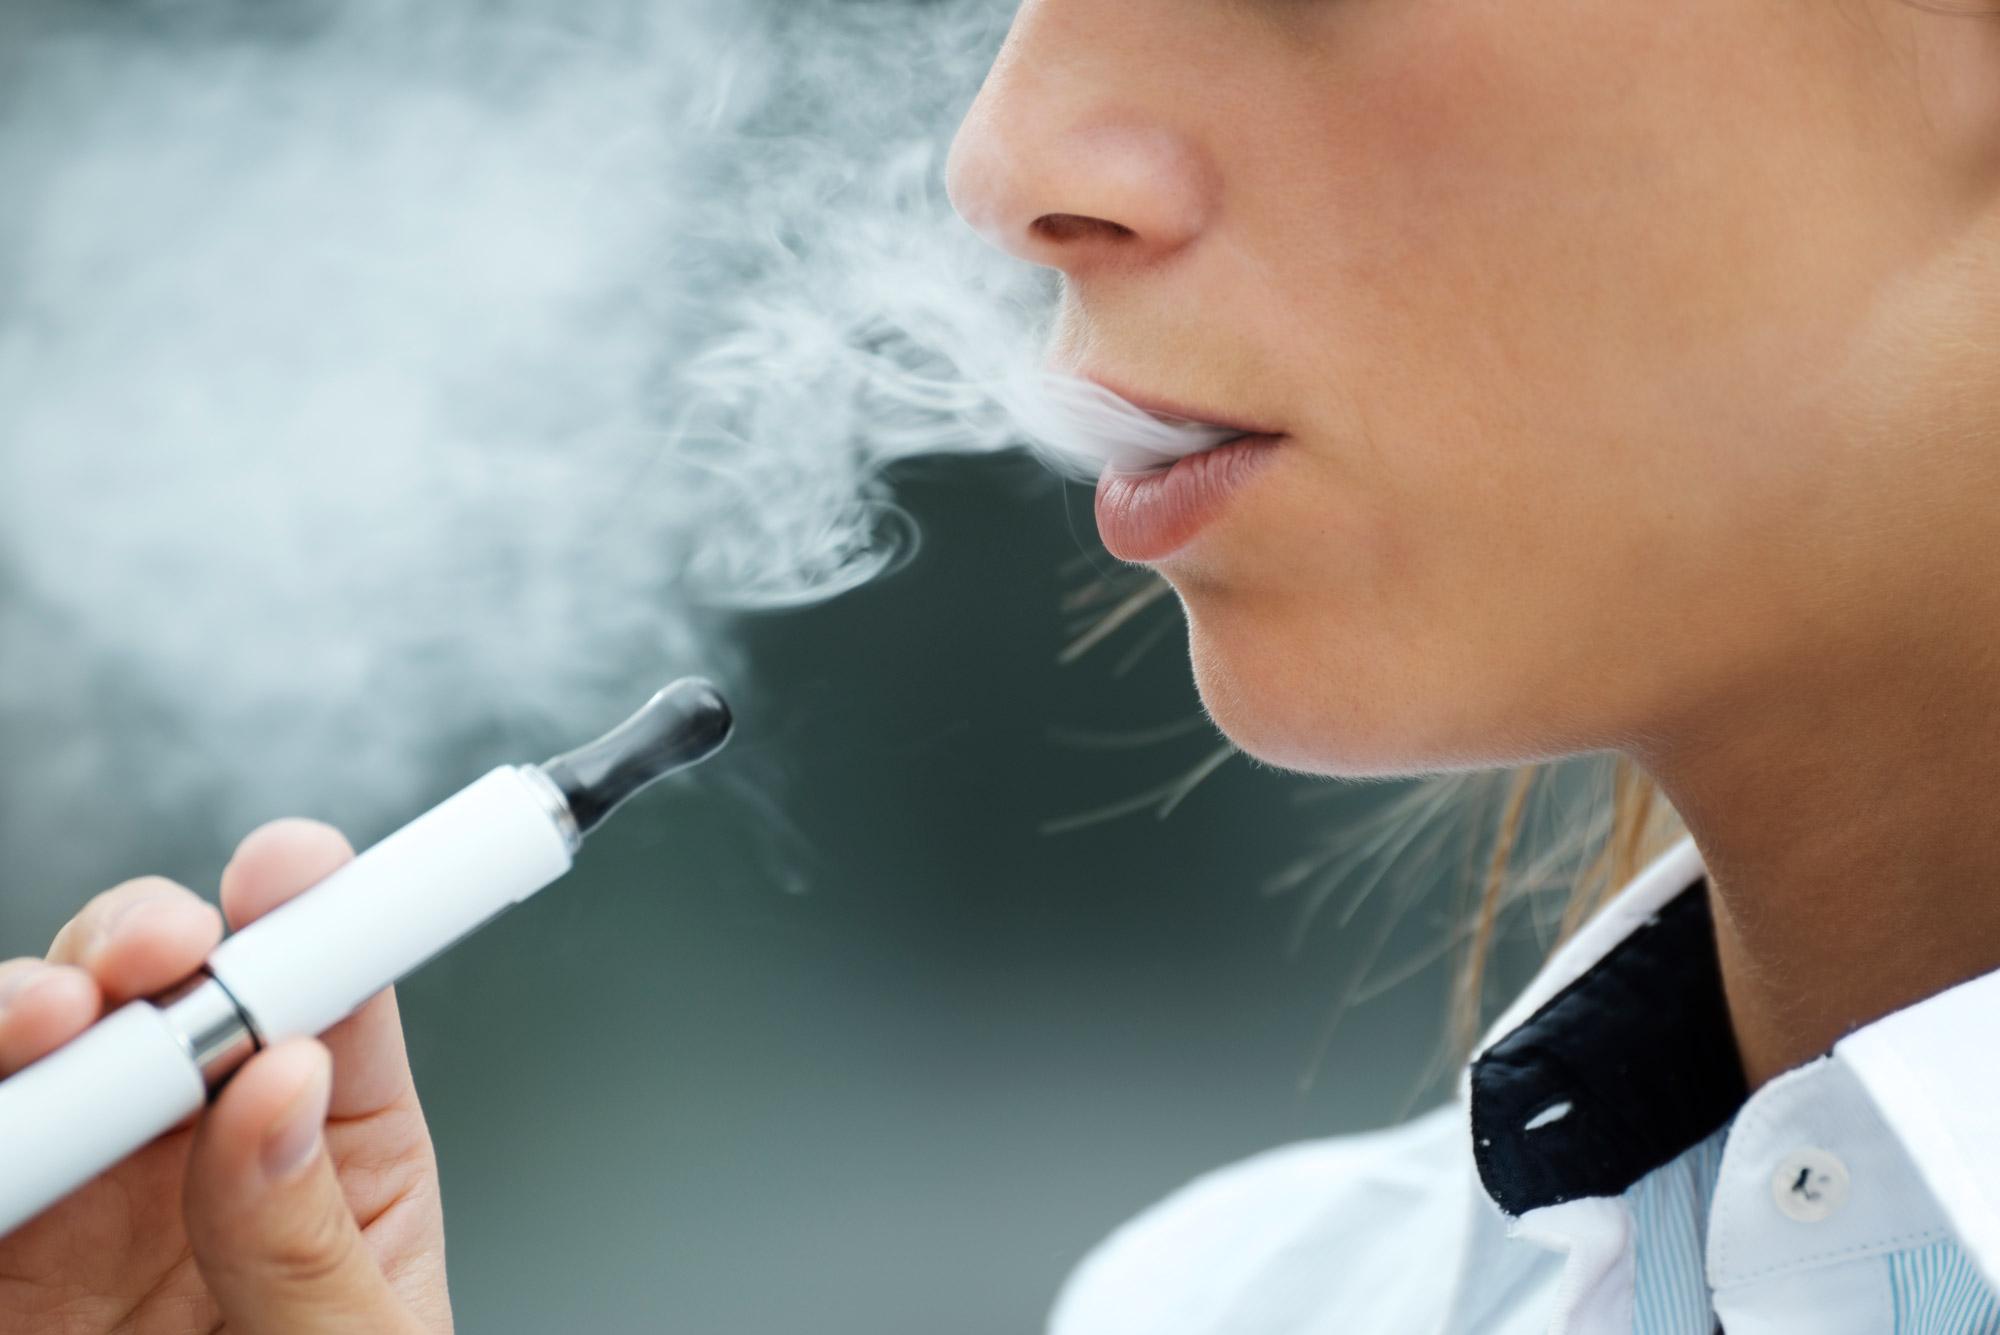 Is vaping without nicotine harmful?